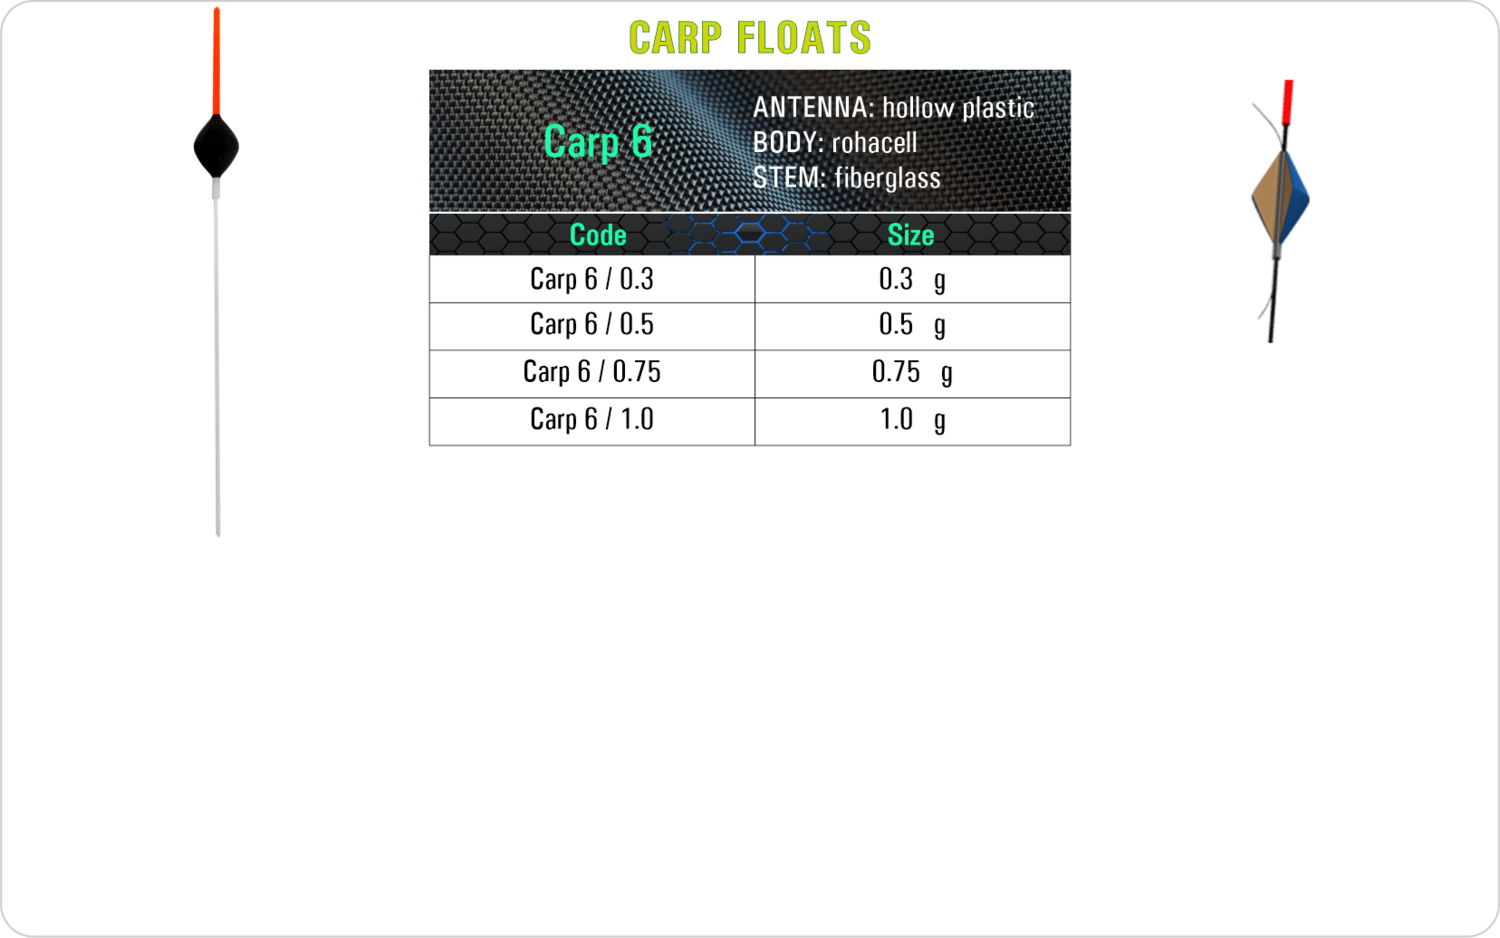 SF Carp 6 Carp float model and table containing an additional information about this float with different codes, sizes, types of the body, the stem and the antenna of the float.